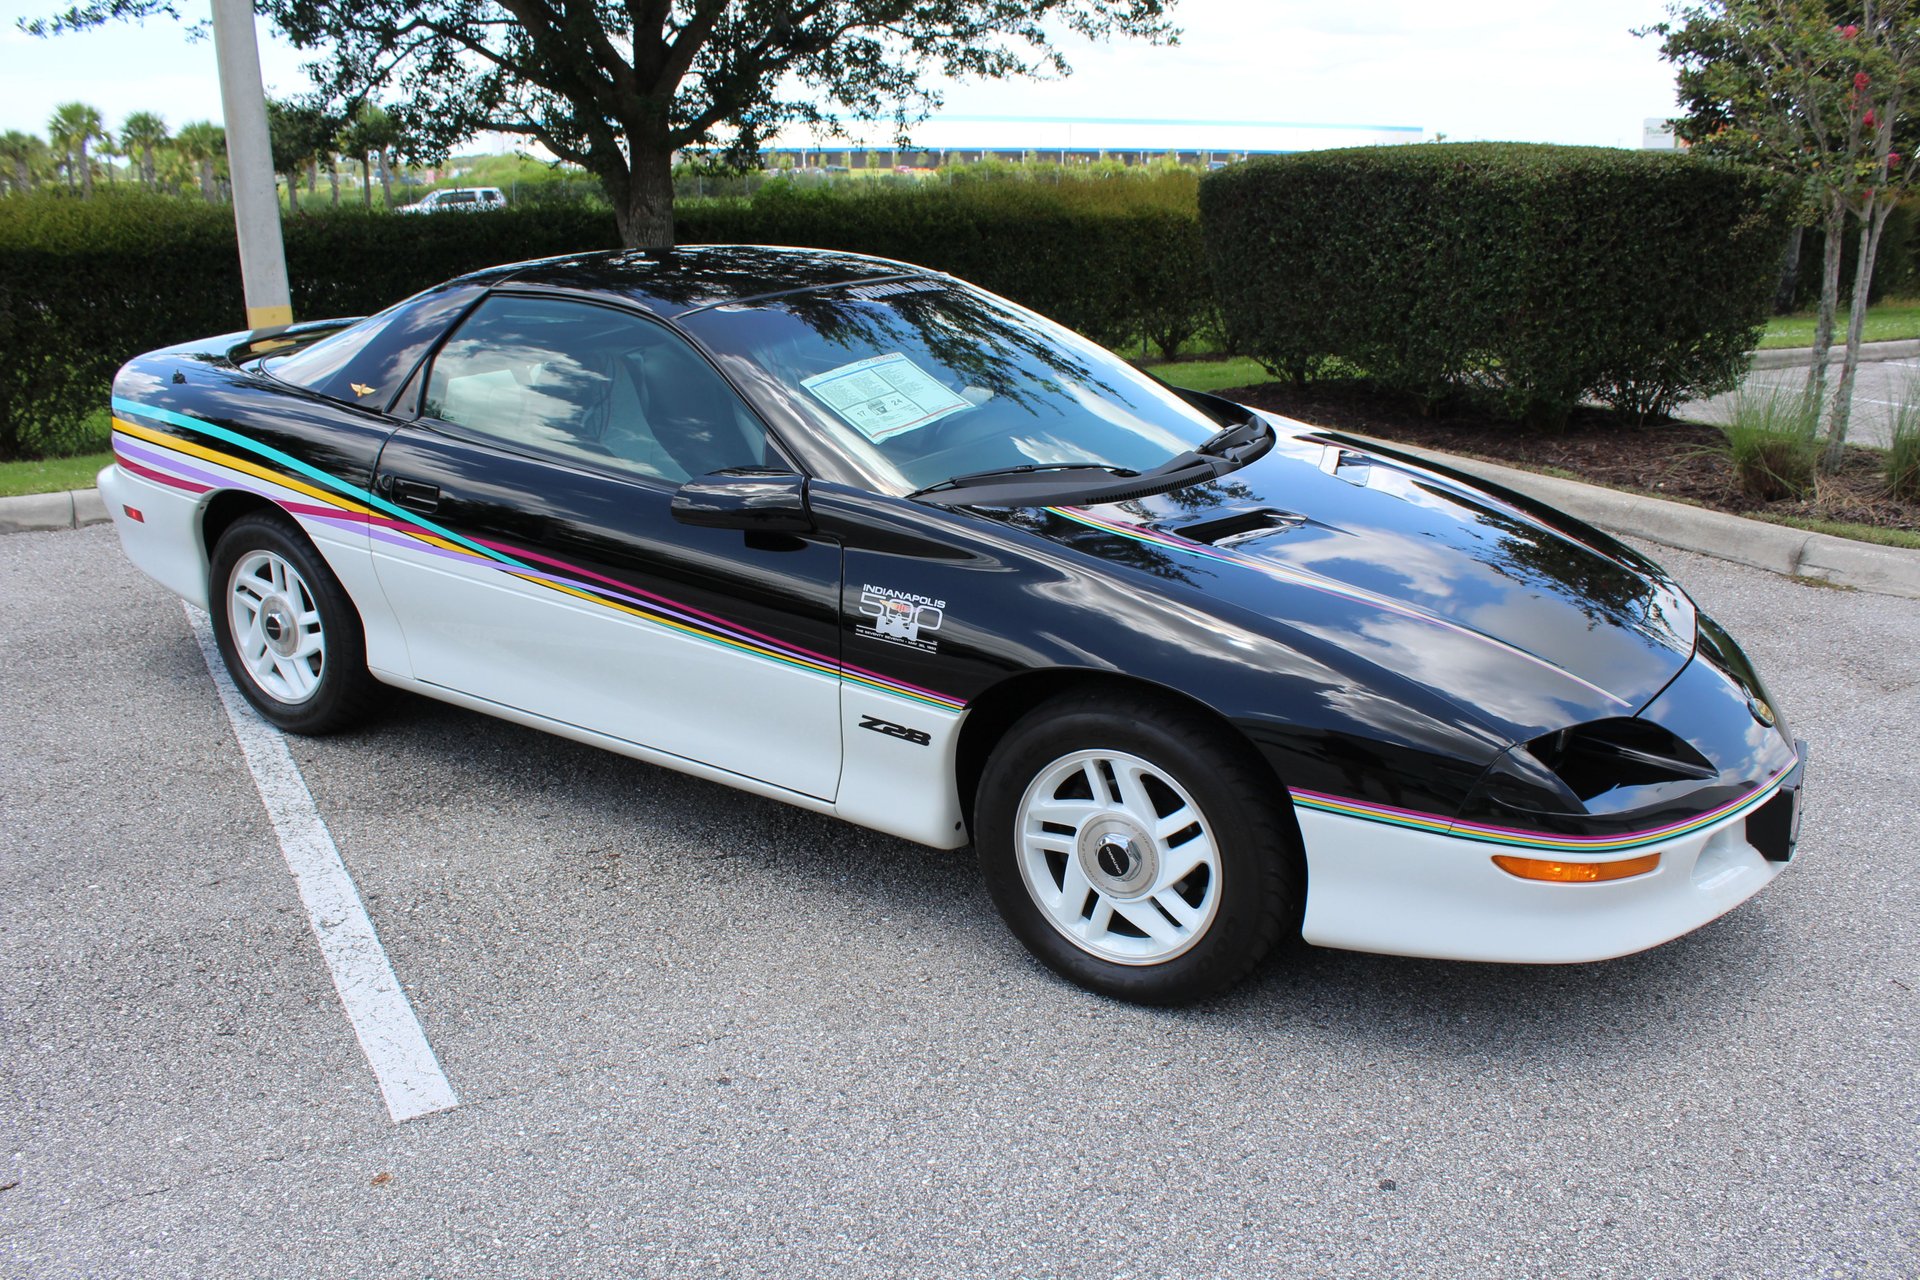 For Sale 1993 Chevrolet Camaro pace car